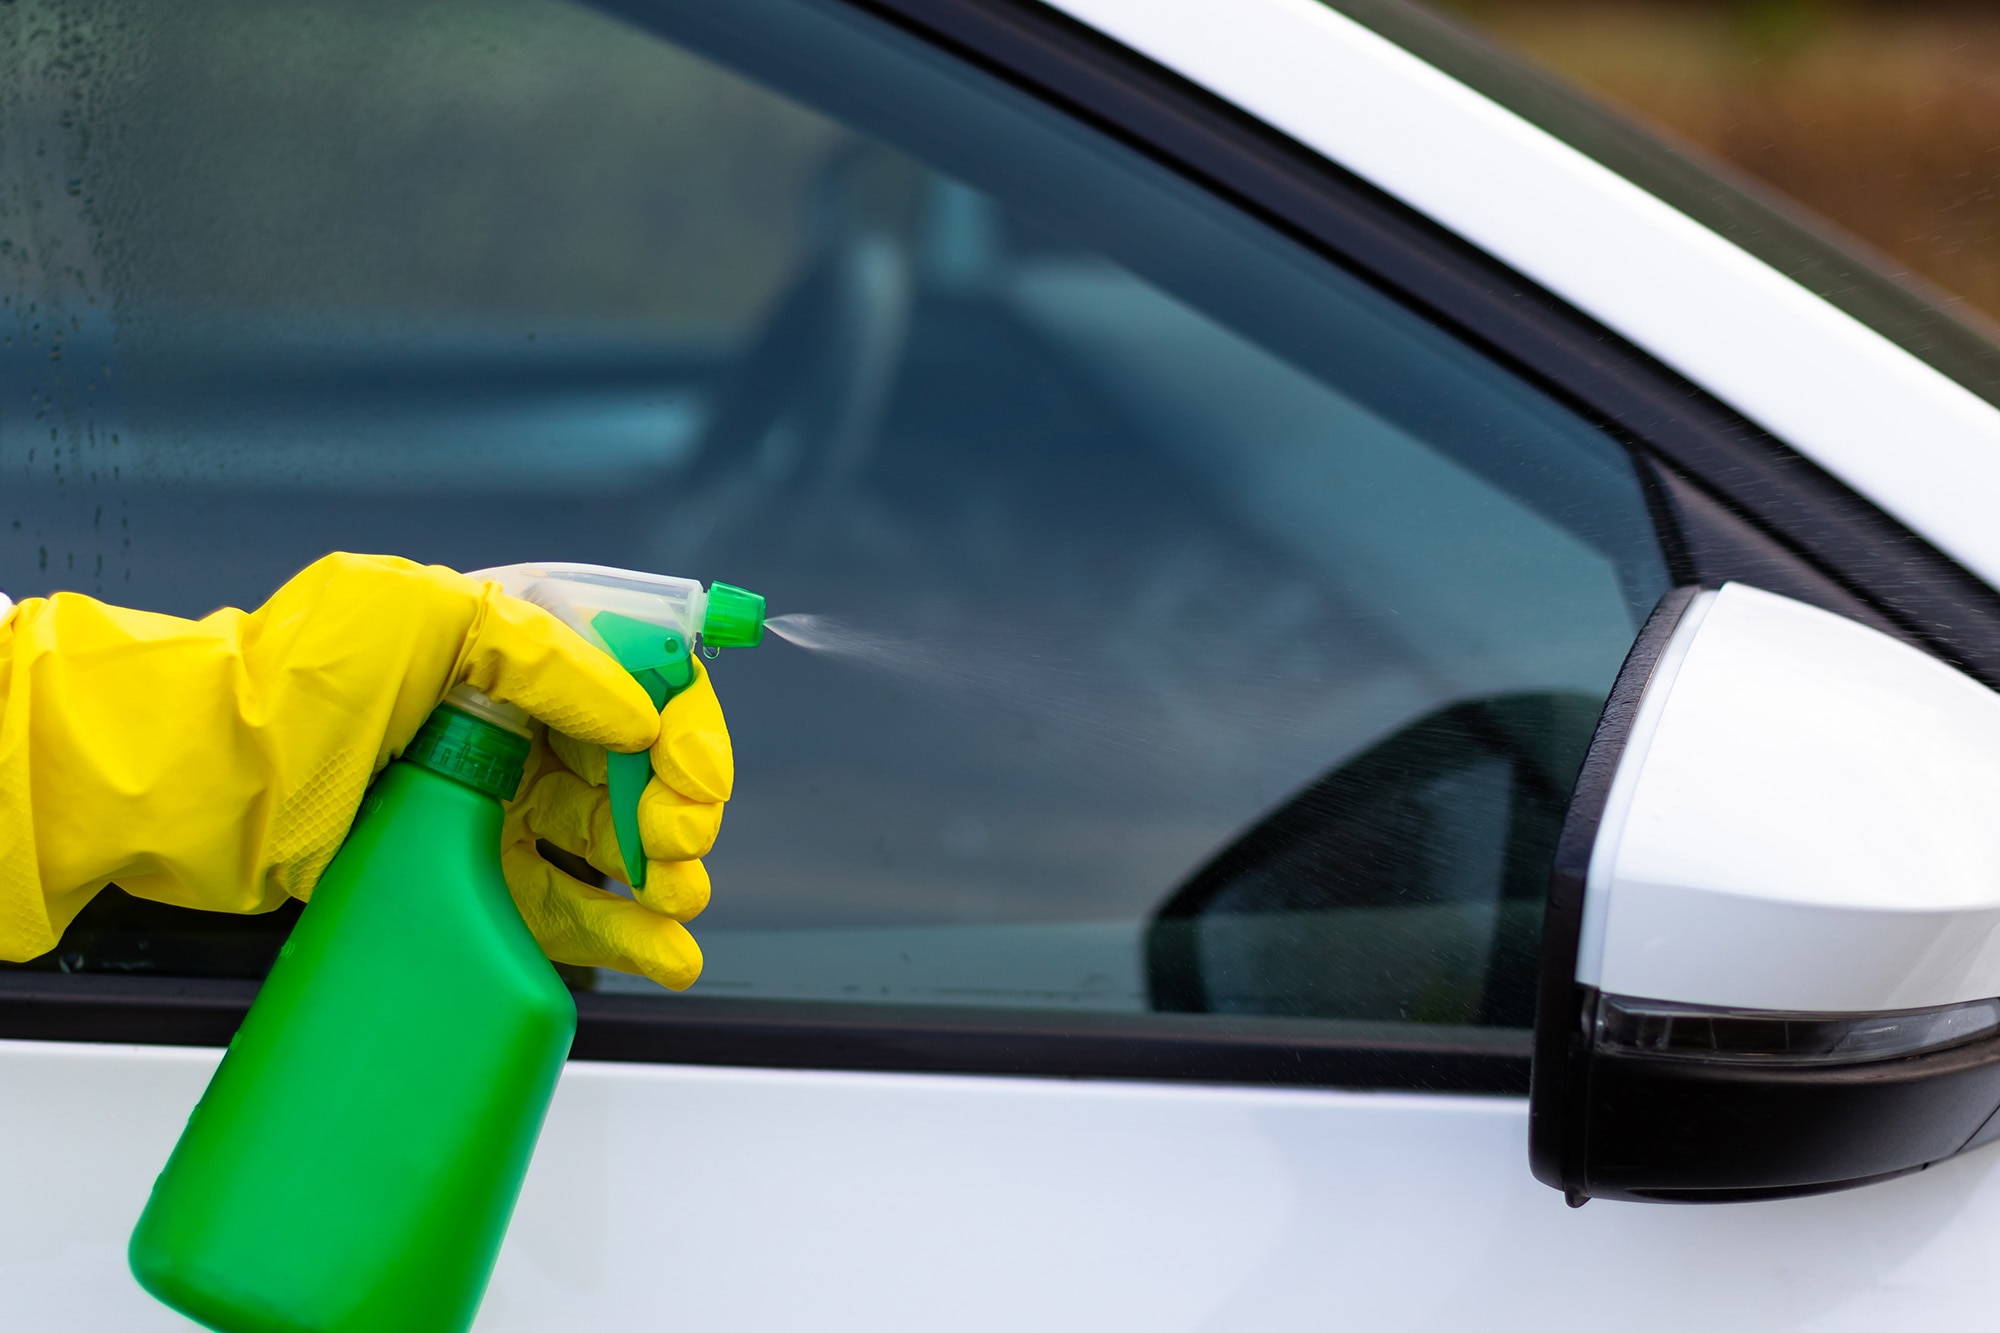 A hand in a yellow glove sprays liquid onto a car from a green bottle.